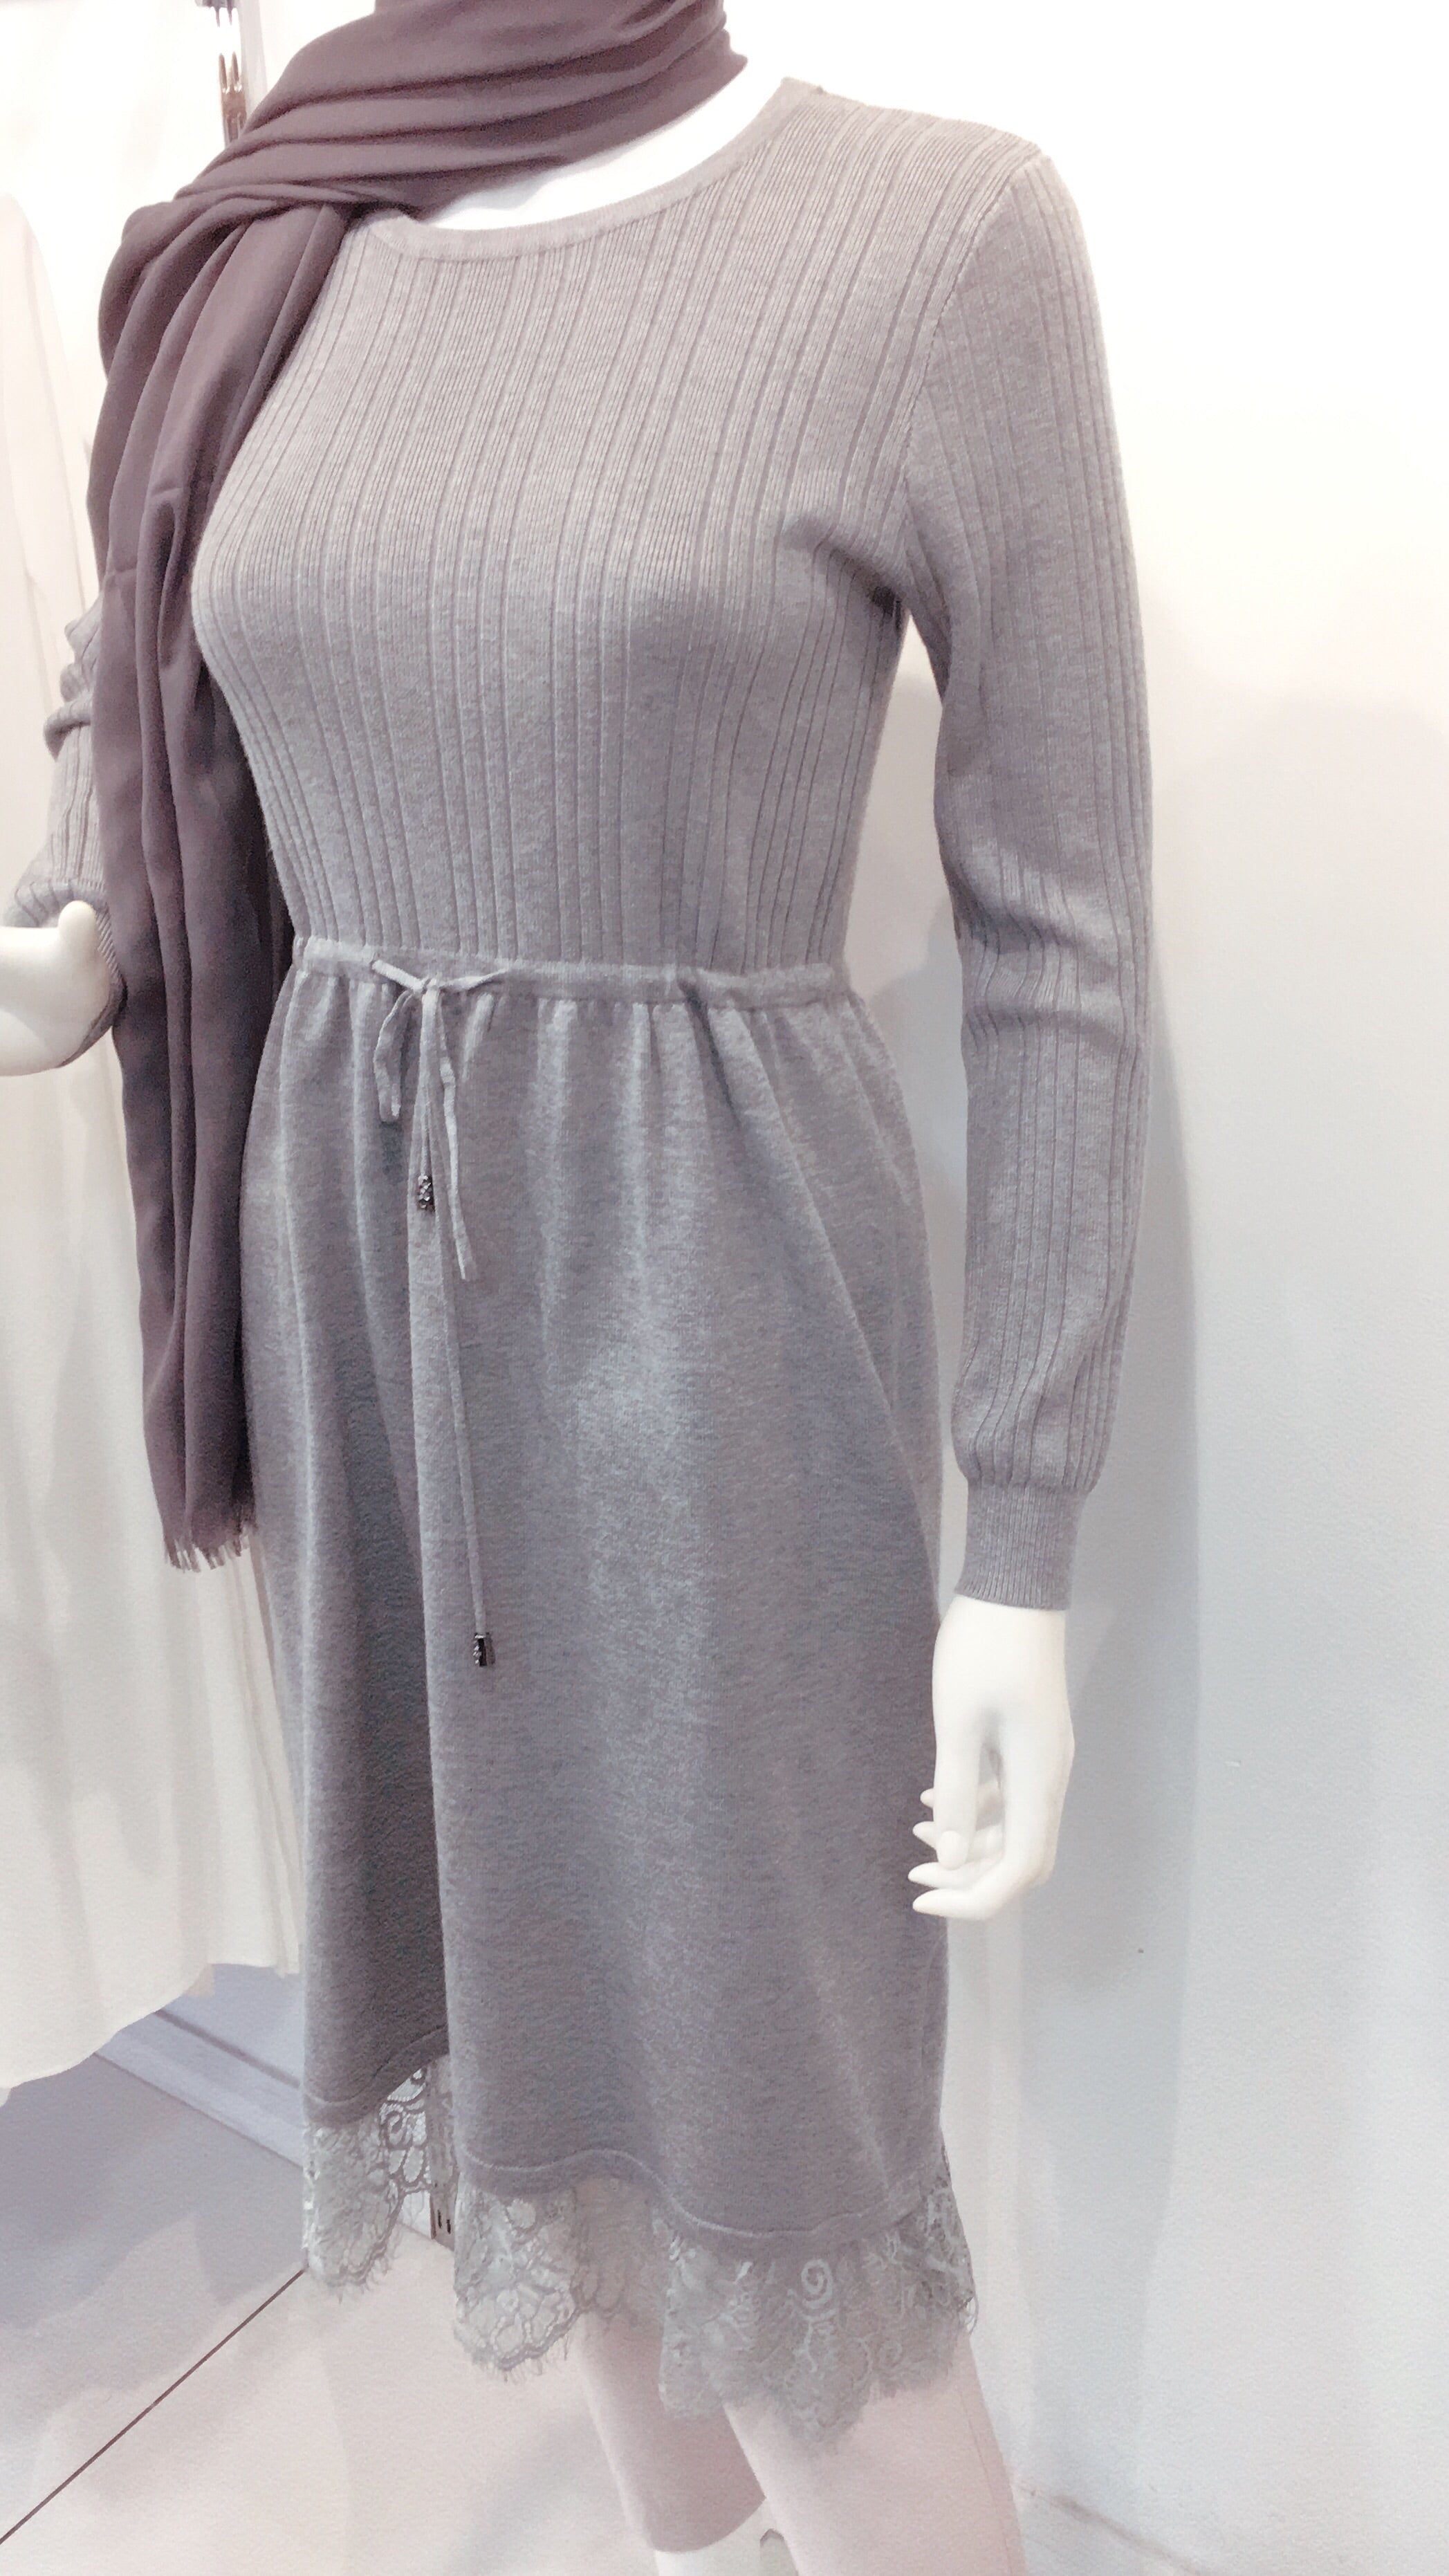 Half ribbed jumper dress with lace